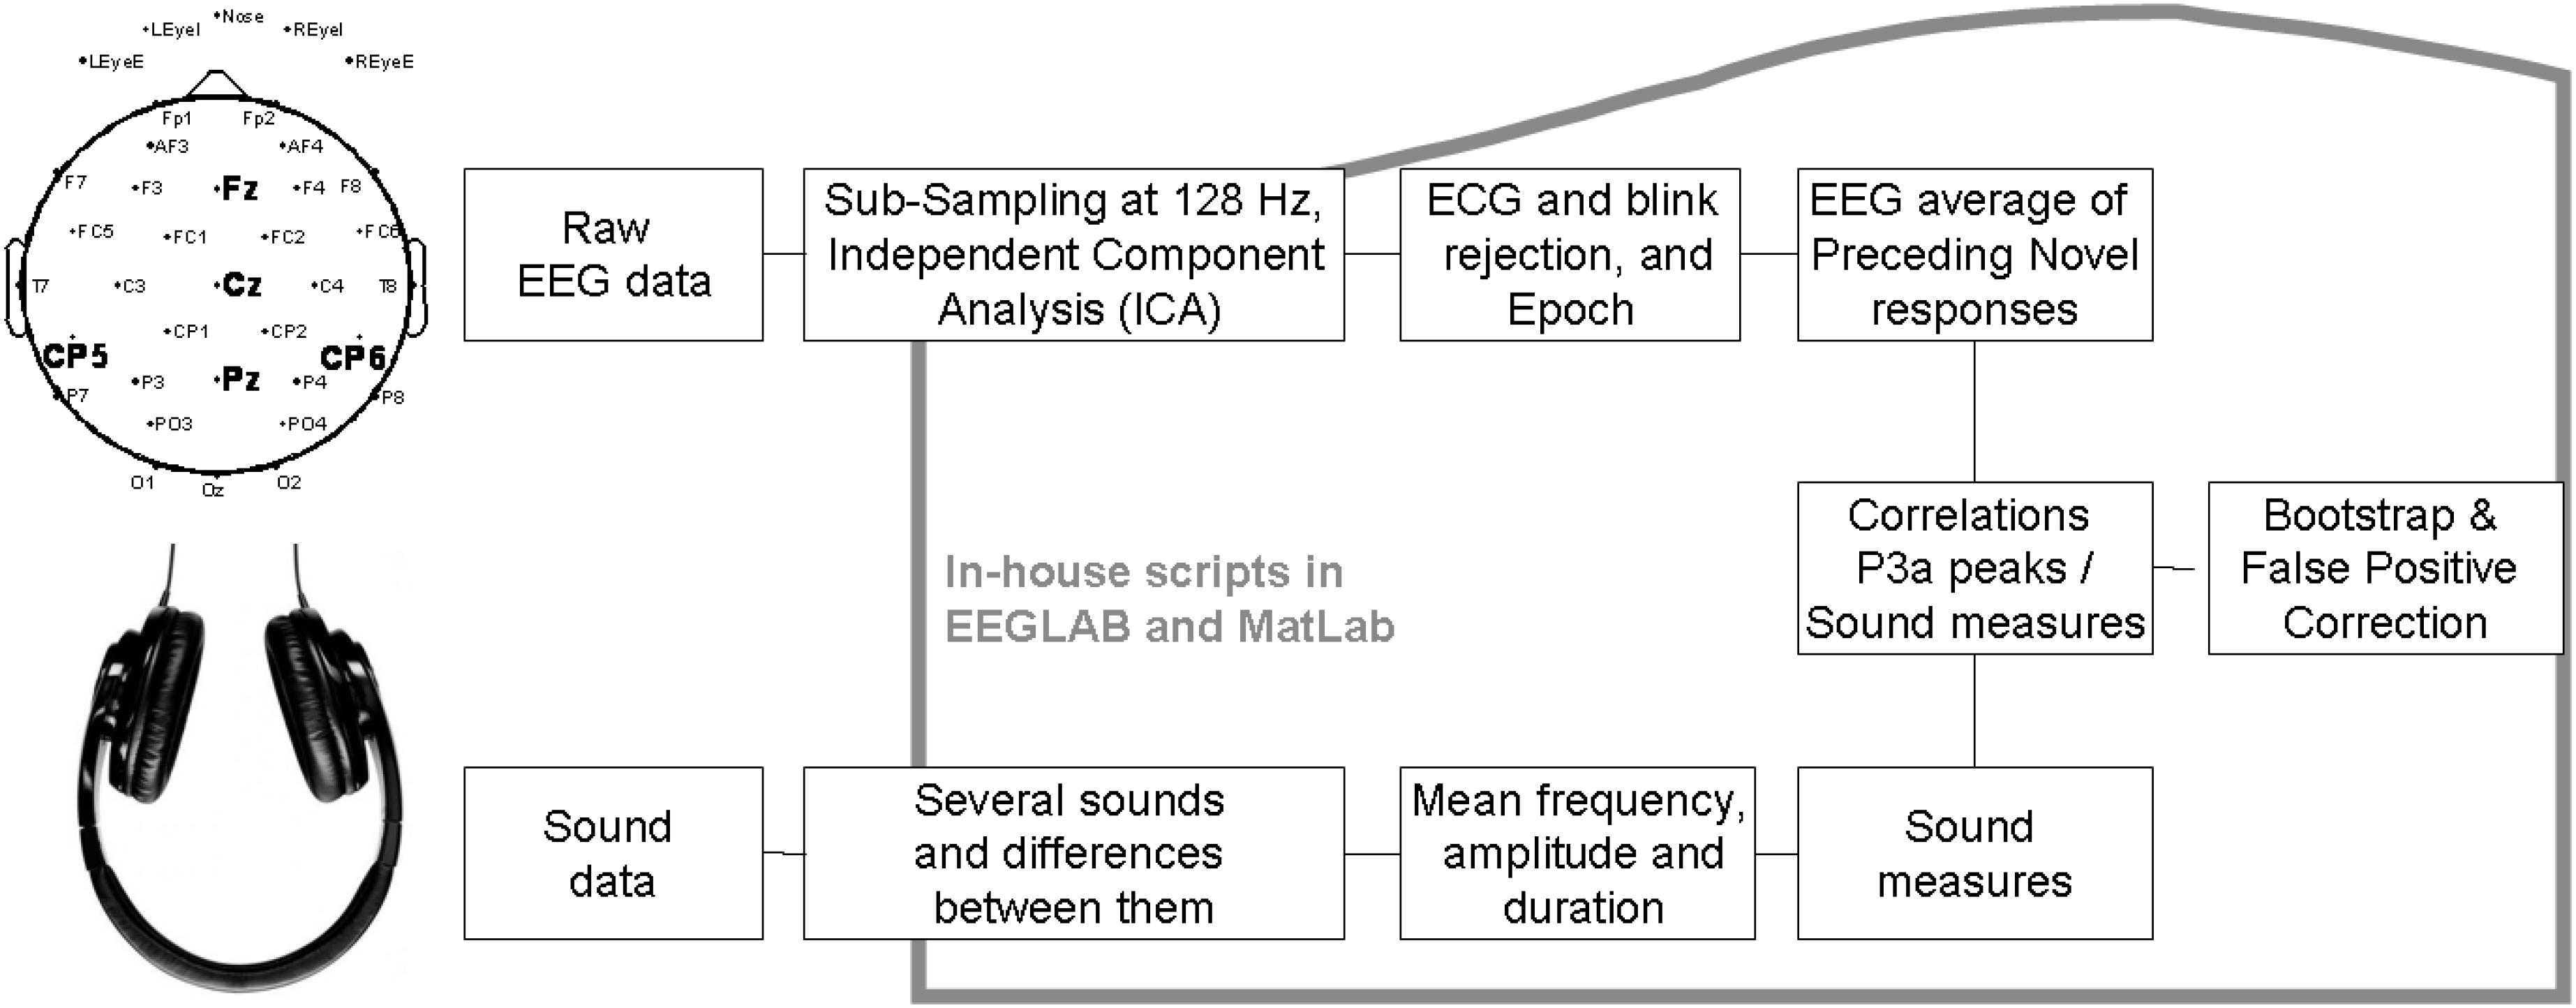 Long-epoch averages showing the ERPs elicited by sequential words